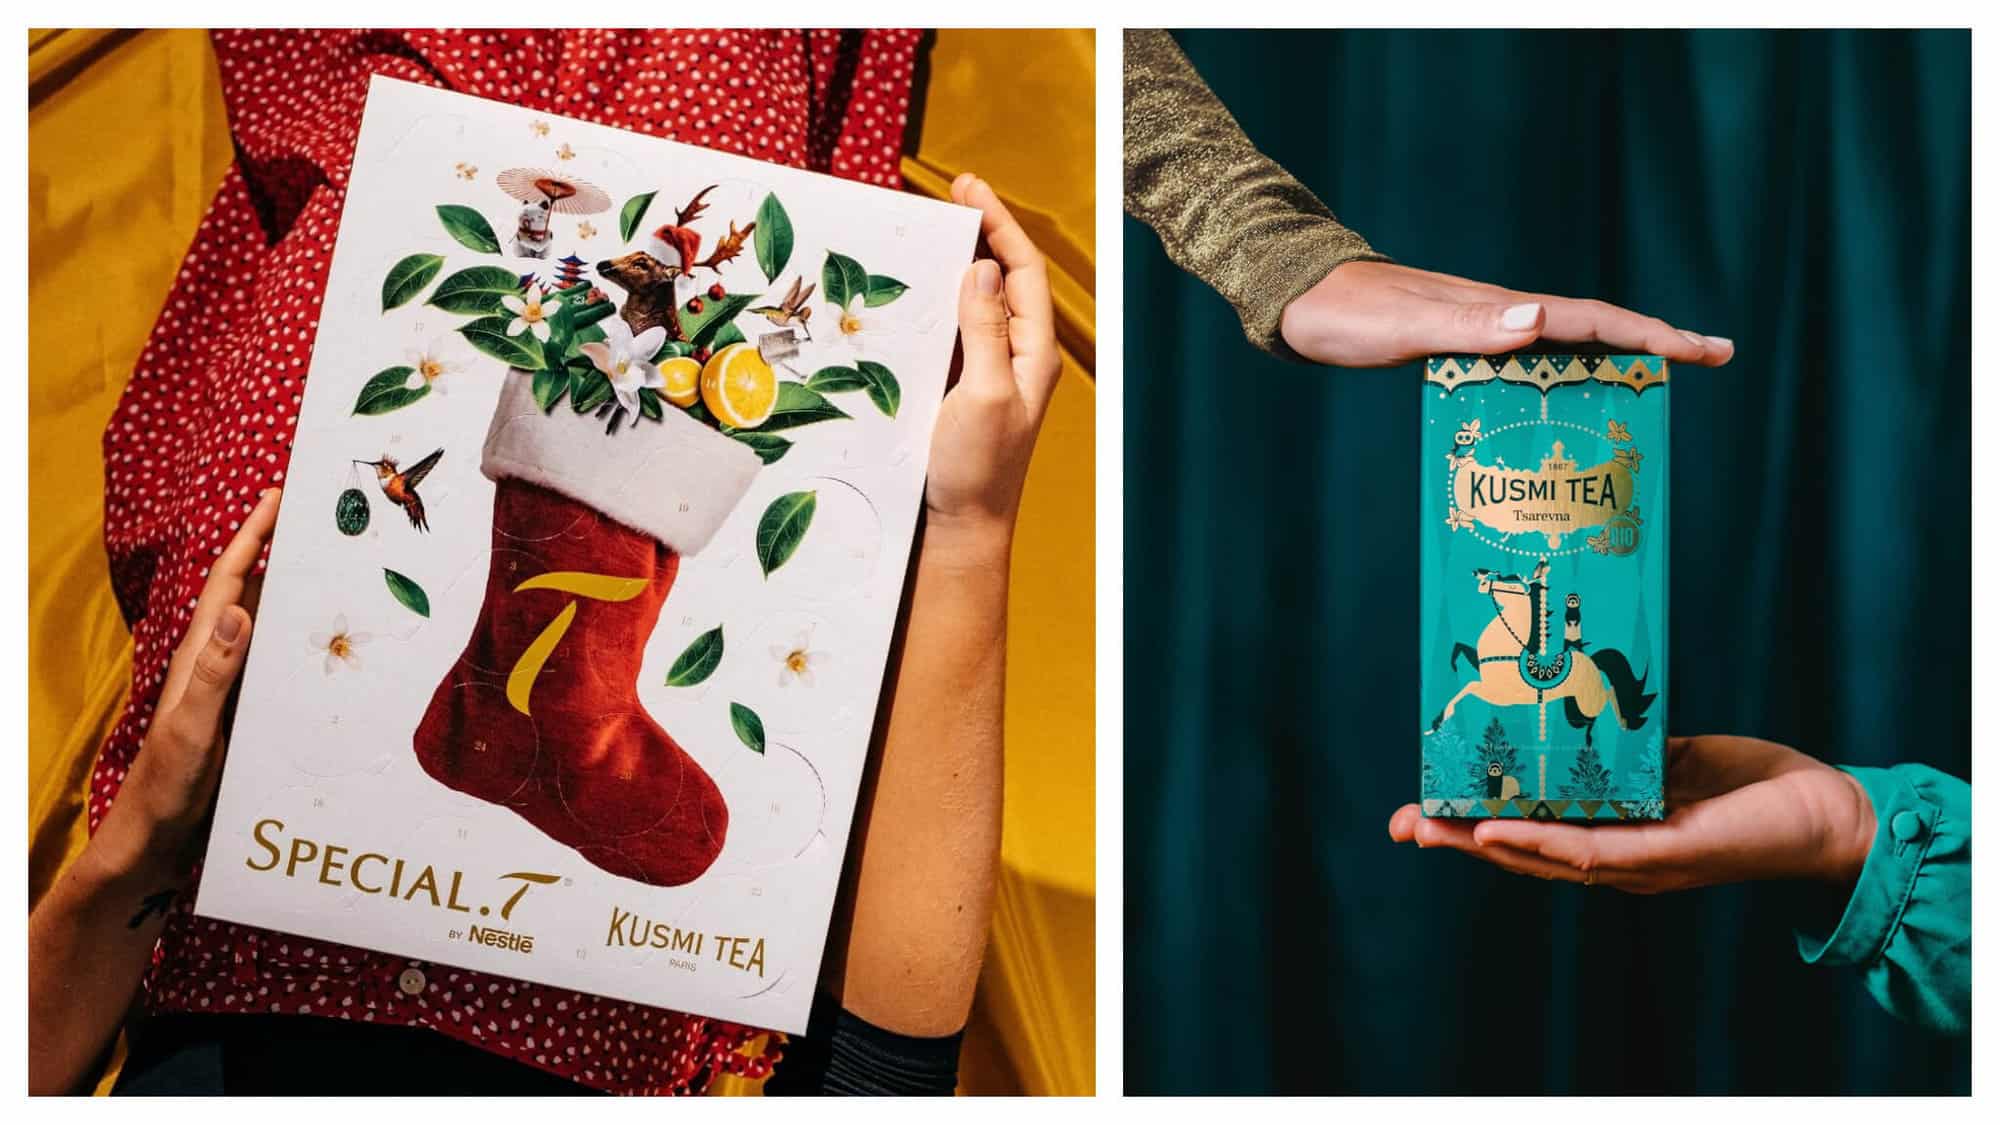 Left: A gift box from Kusmi Tea with a red stocking and overflowing with green leaves, oranges and a reindeer wearing a red Santa cap. Right: a turquoise and gold box of Kusmi tea against blue curtain.